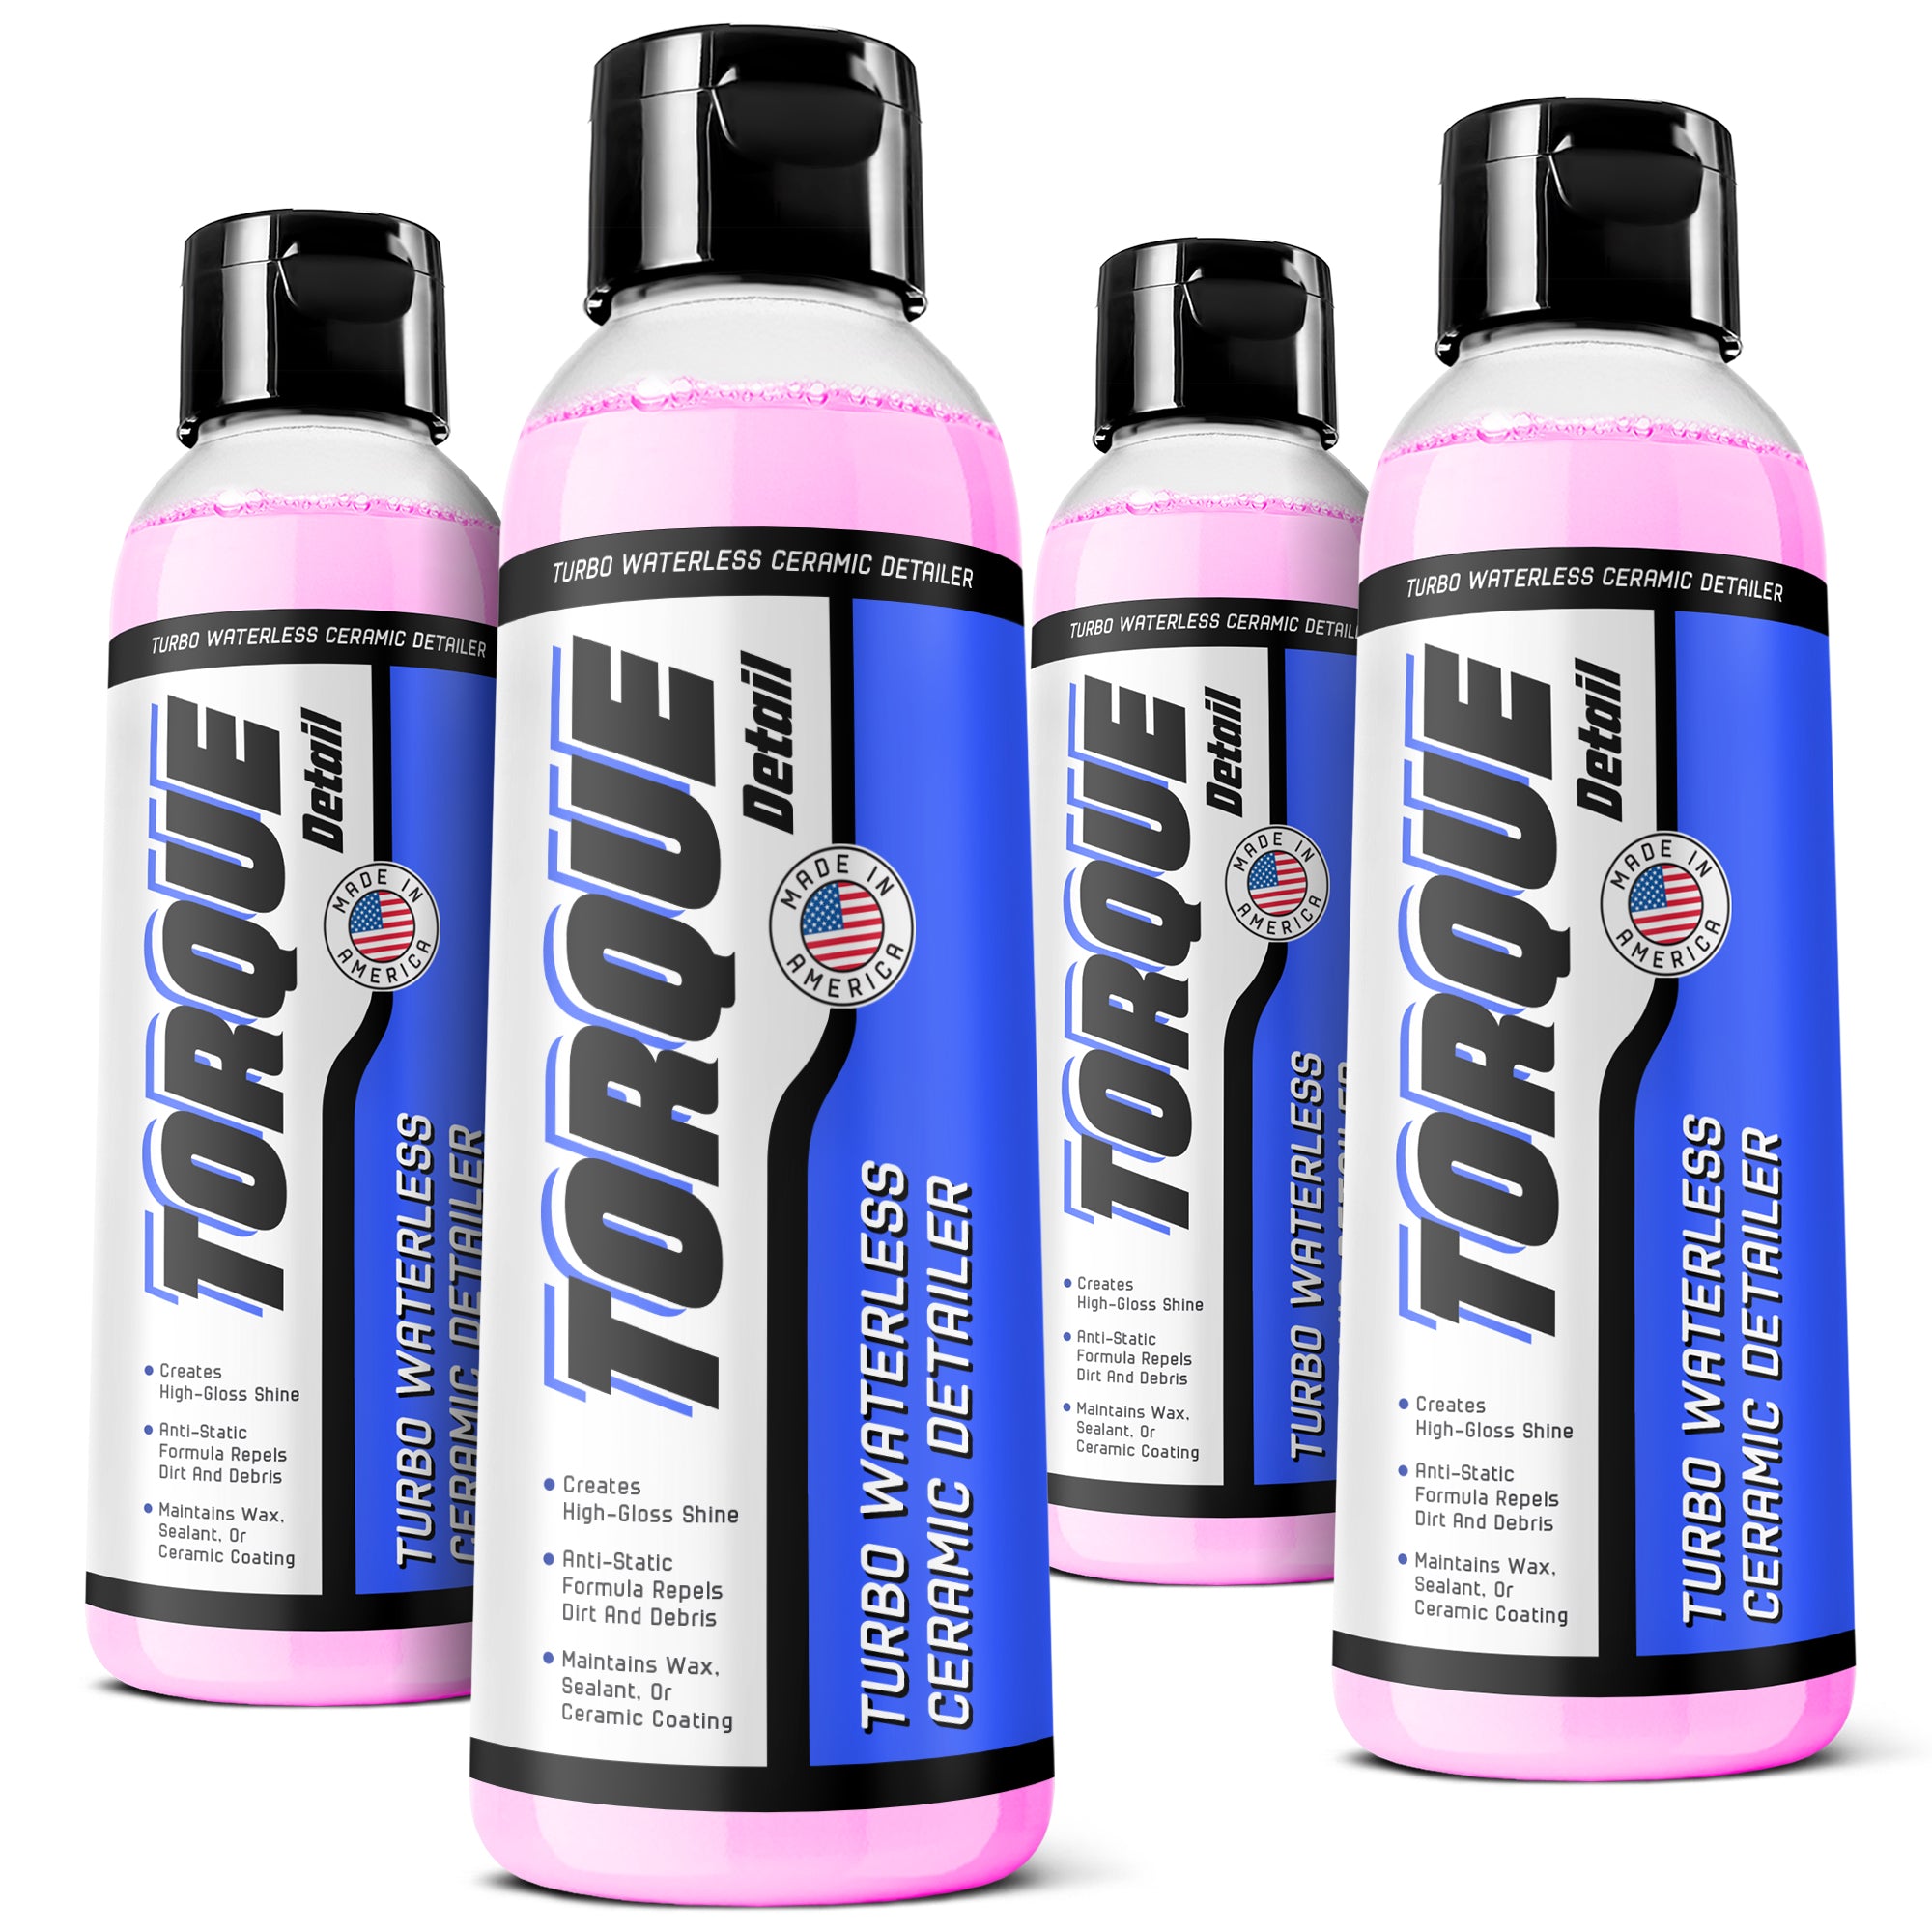 Turbo RECHARGE Ceramic Waterless Detailer (2 oz Refill) - 4 Bottle Pack July 4th Special Torque Detail